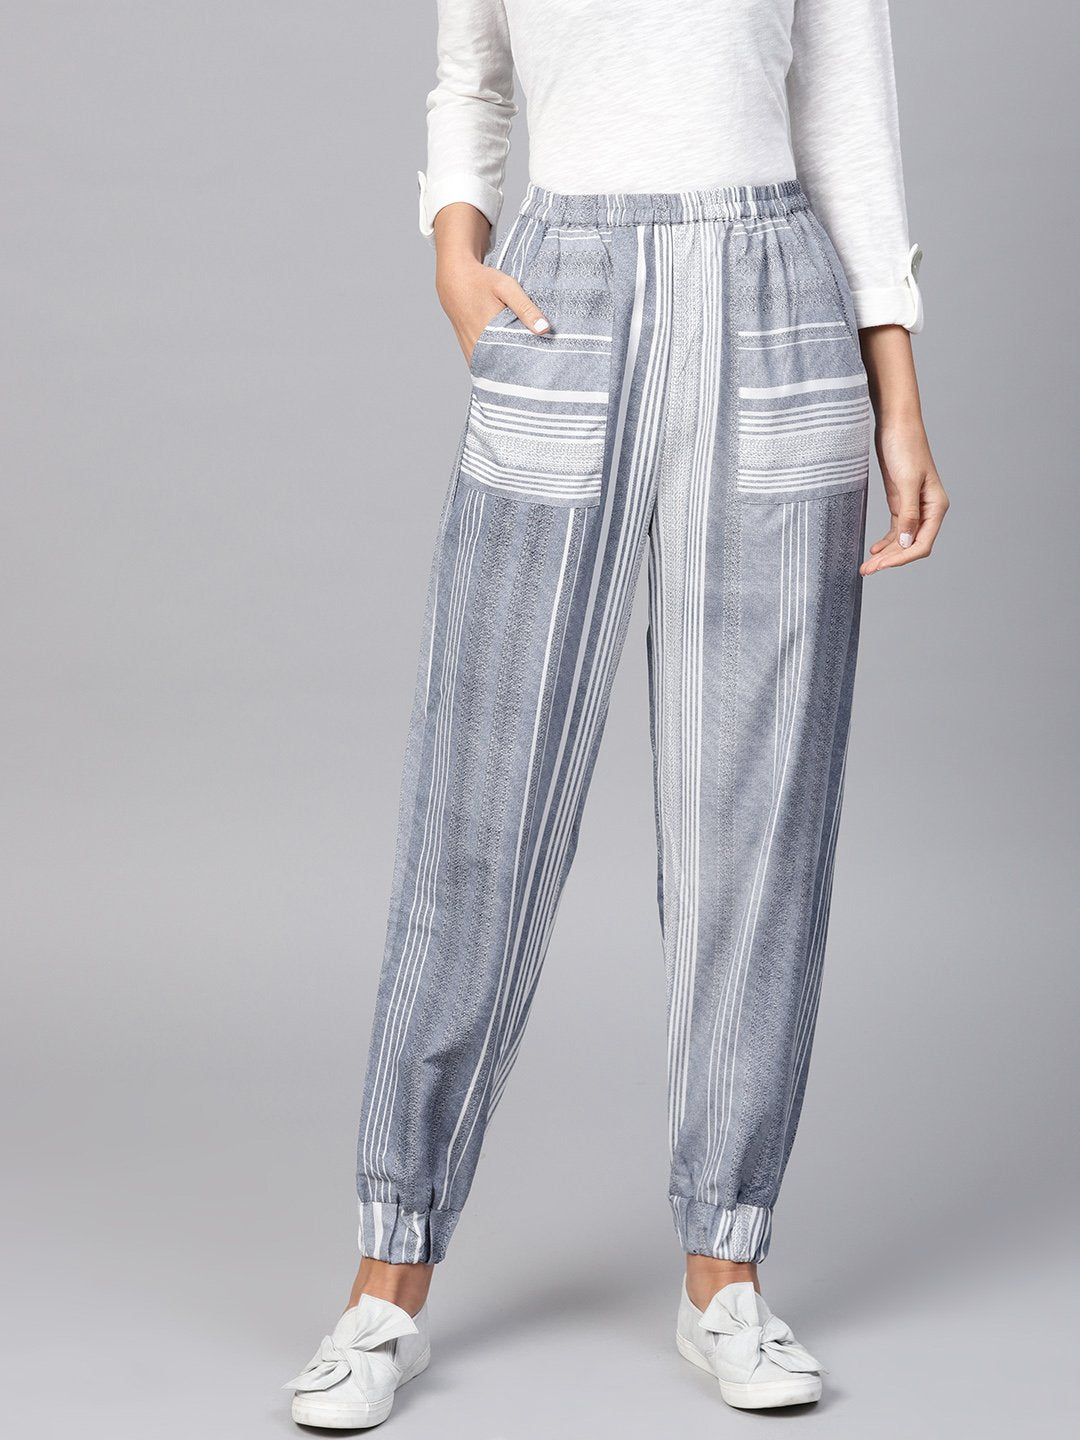 Women's Grey Striped Ankle Length Jogger With Elastic Band - Nayo Clothing